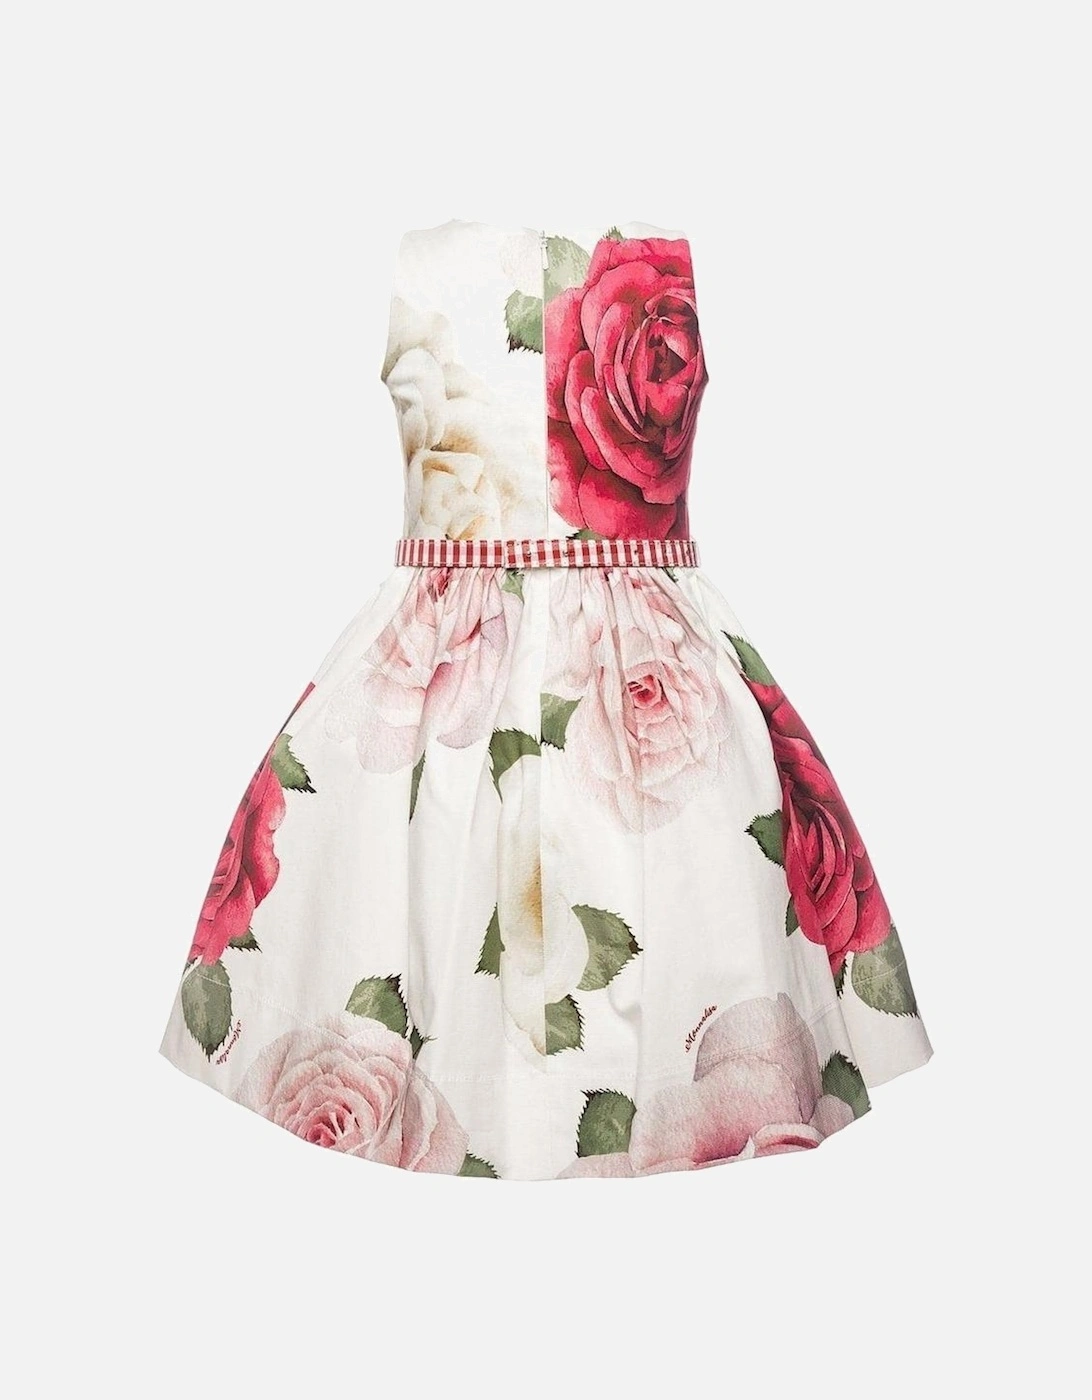 'Candy Flowers' Chic Rose Dress